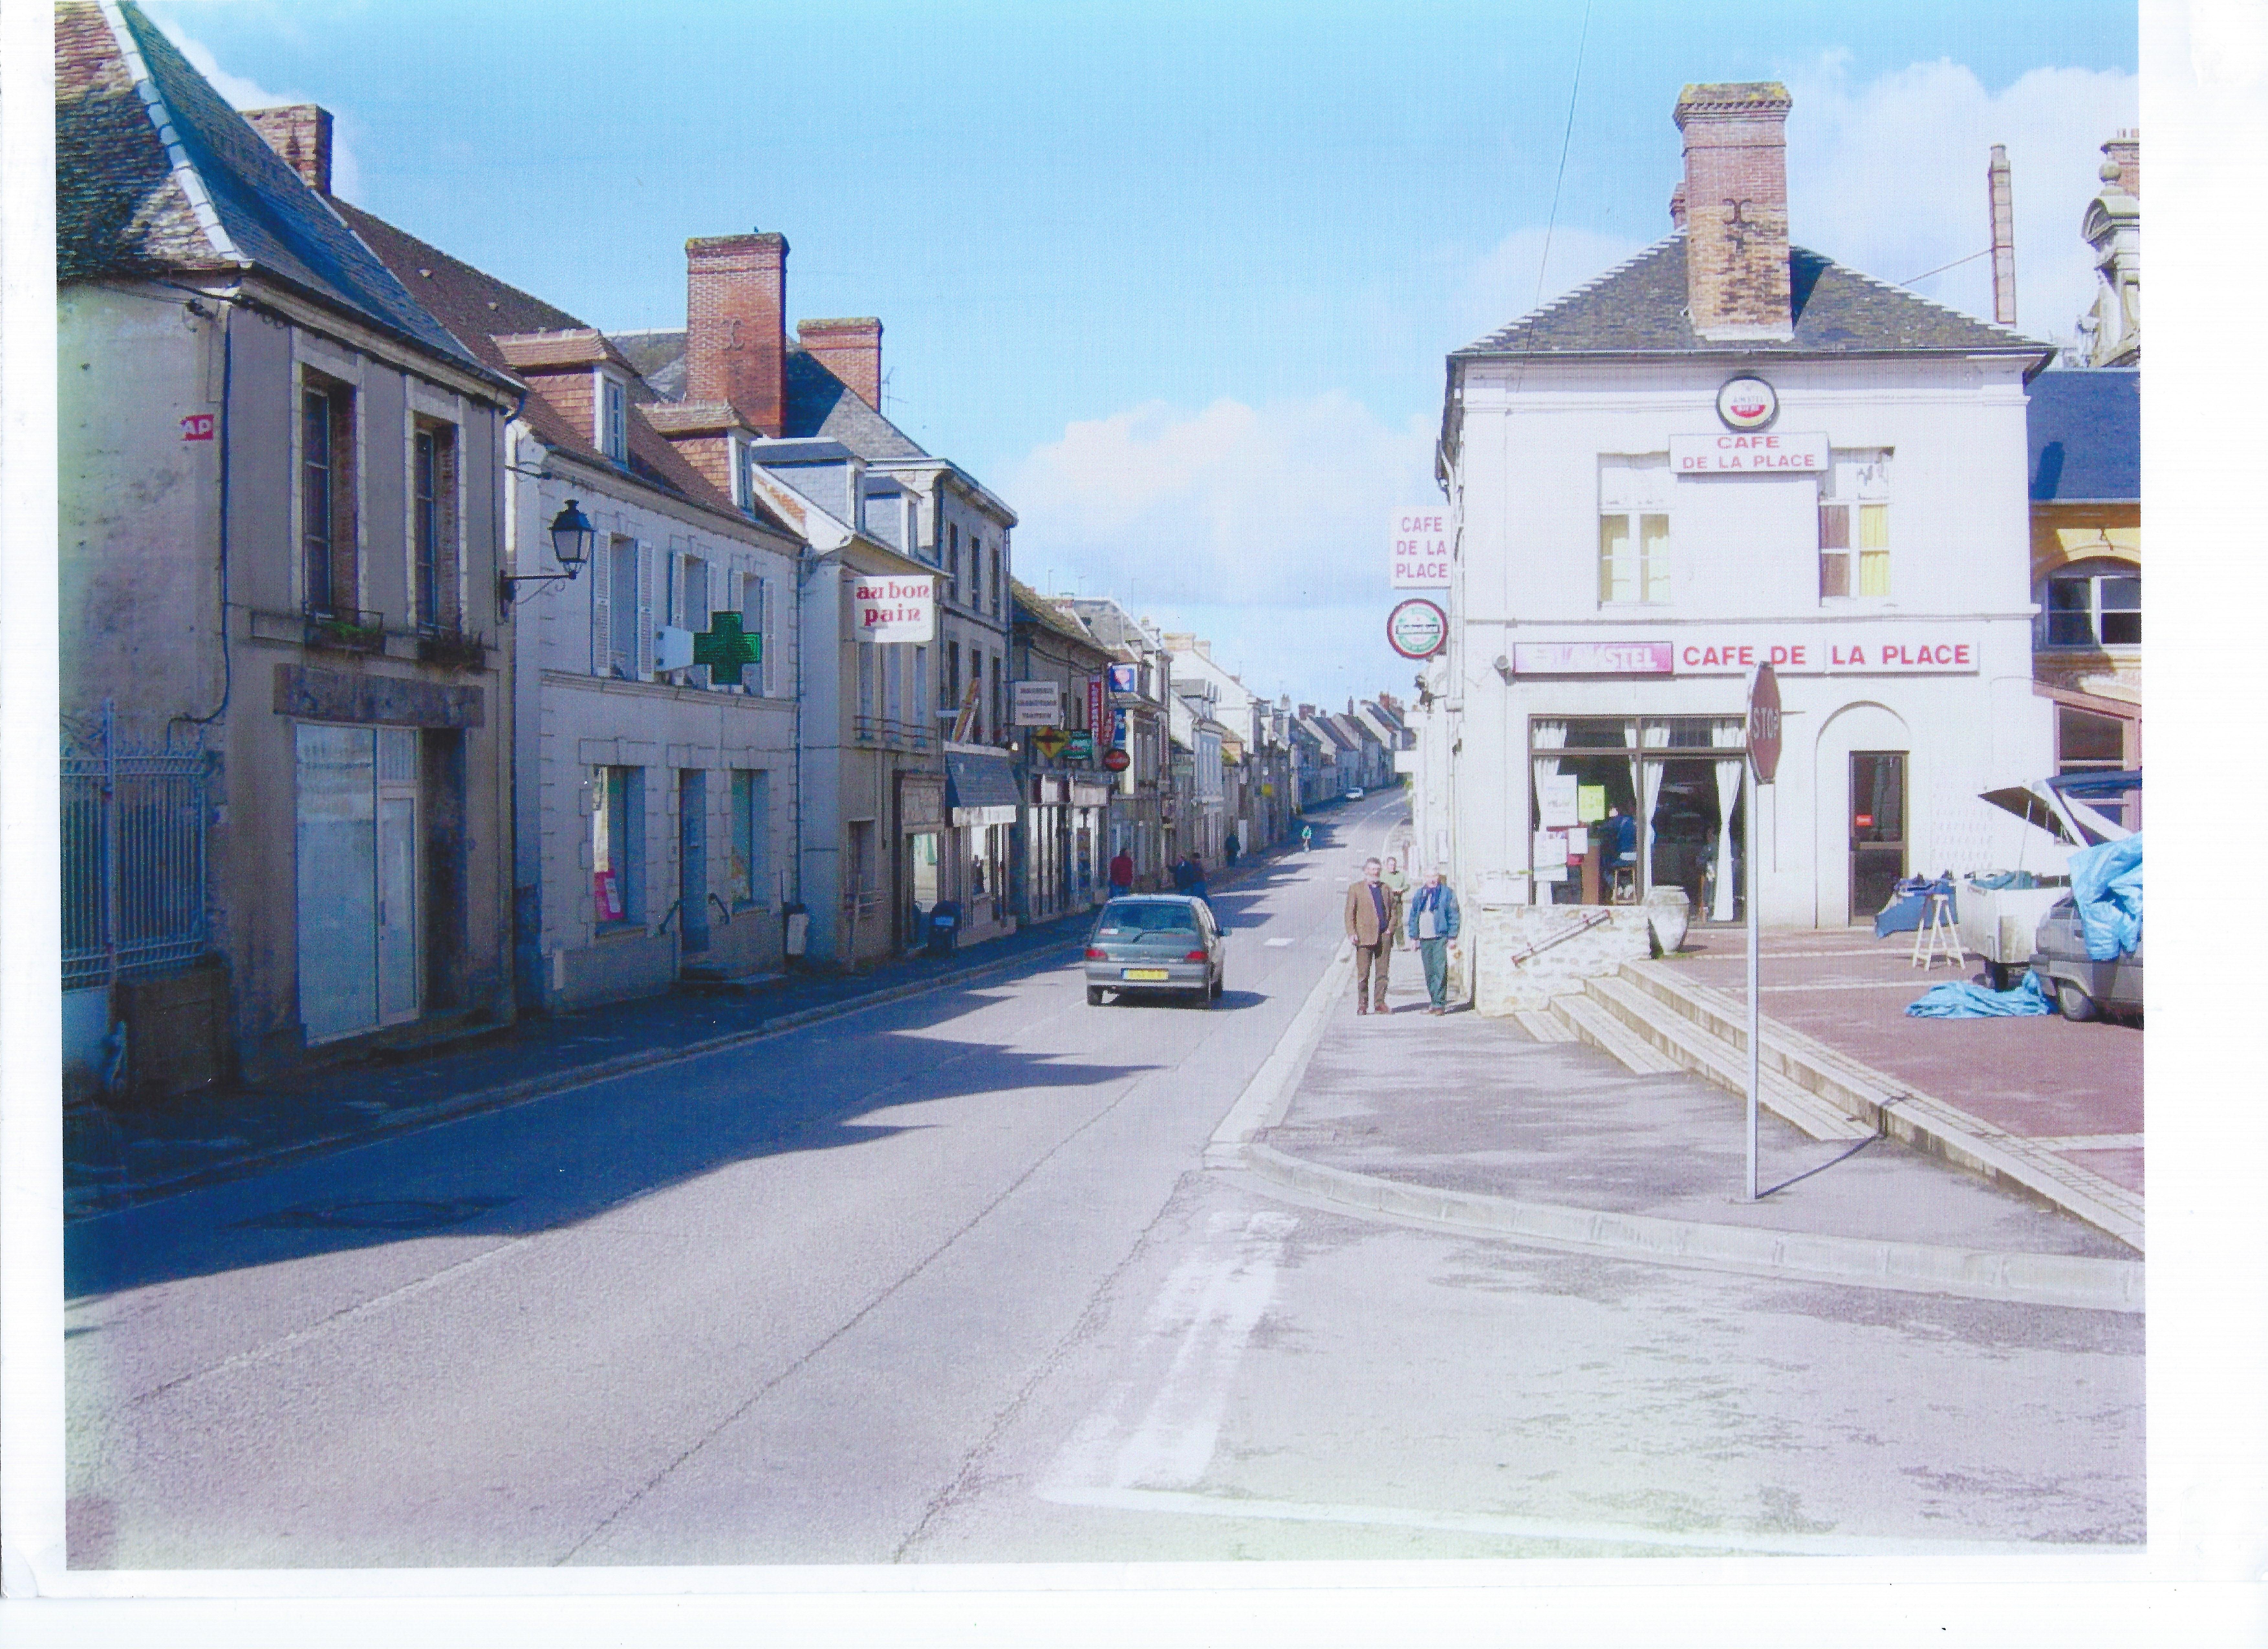 The town of Mortree in France